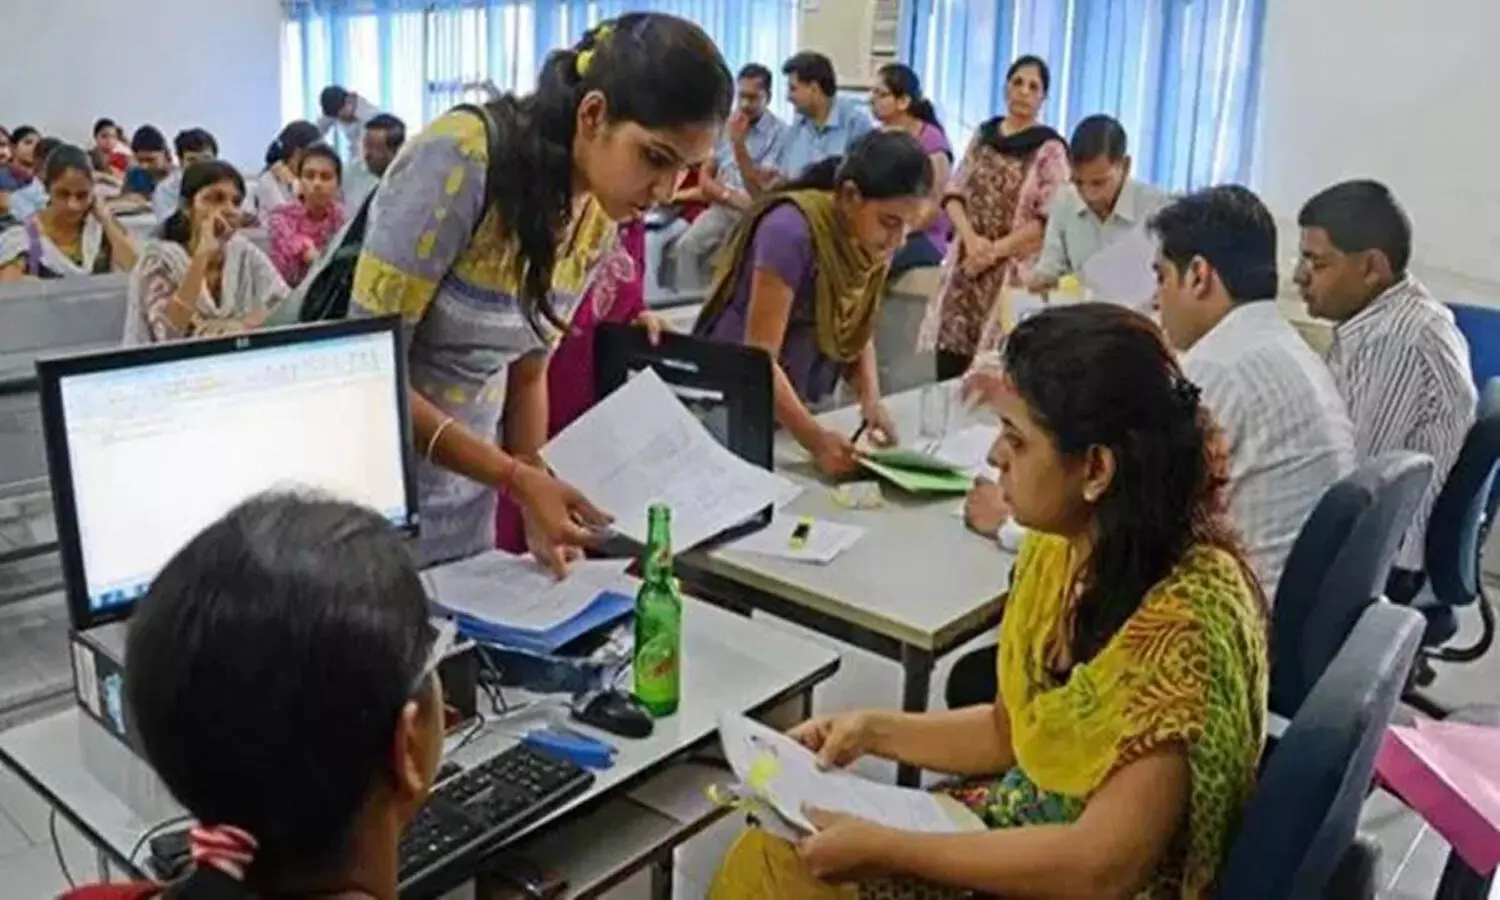 Delhi ITI admission 2022: All you need to know about registration process, counselling schedule